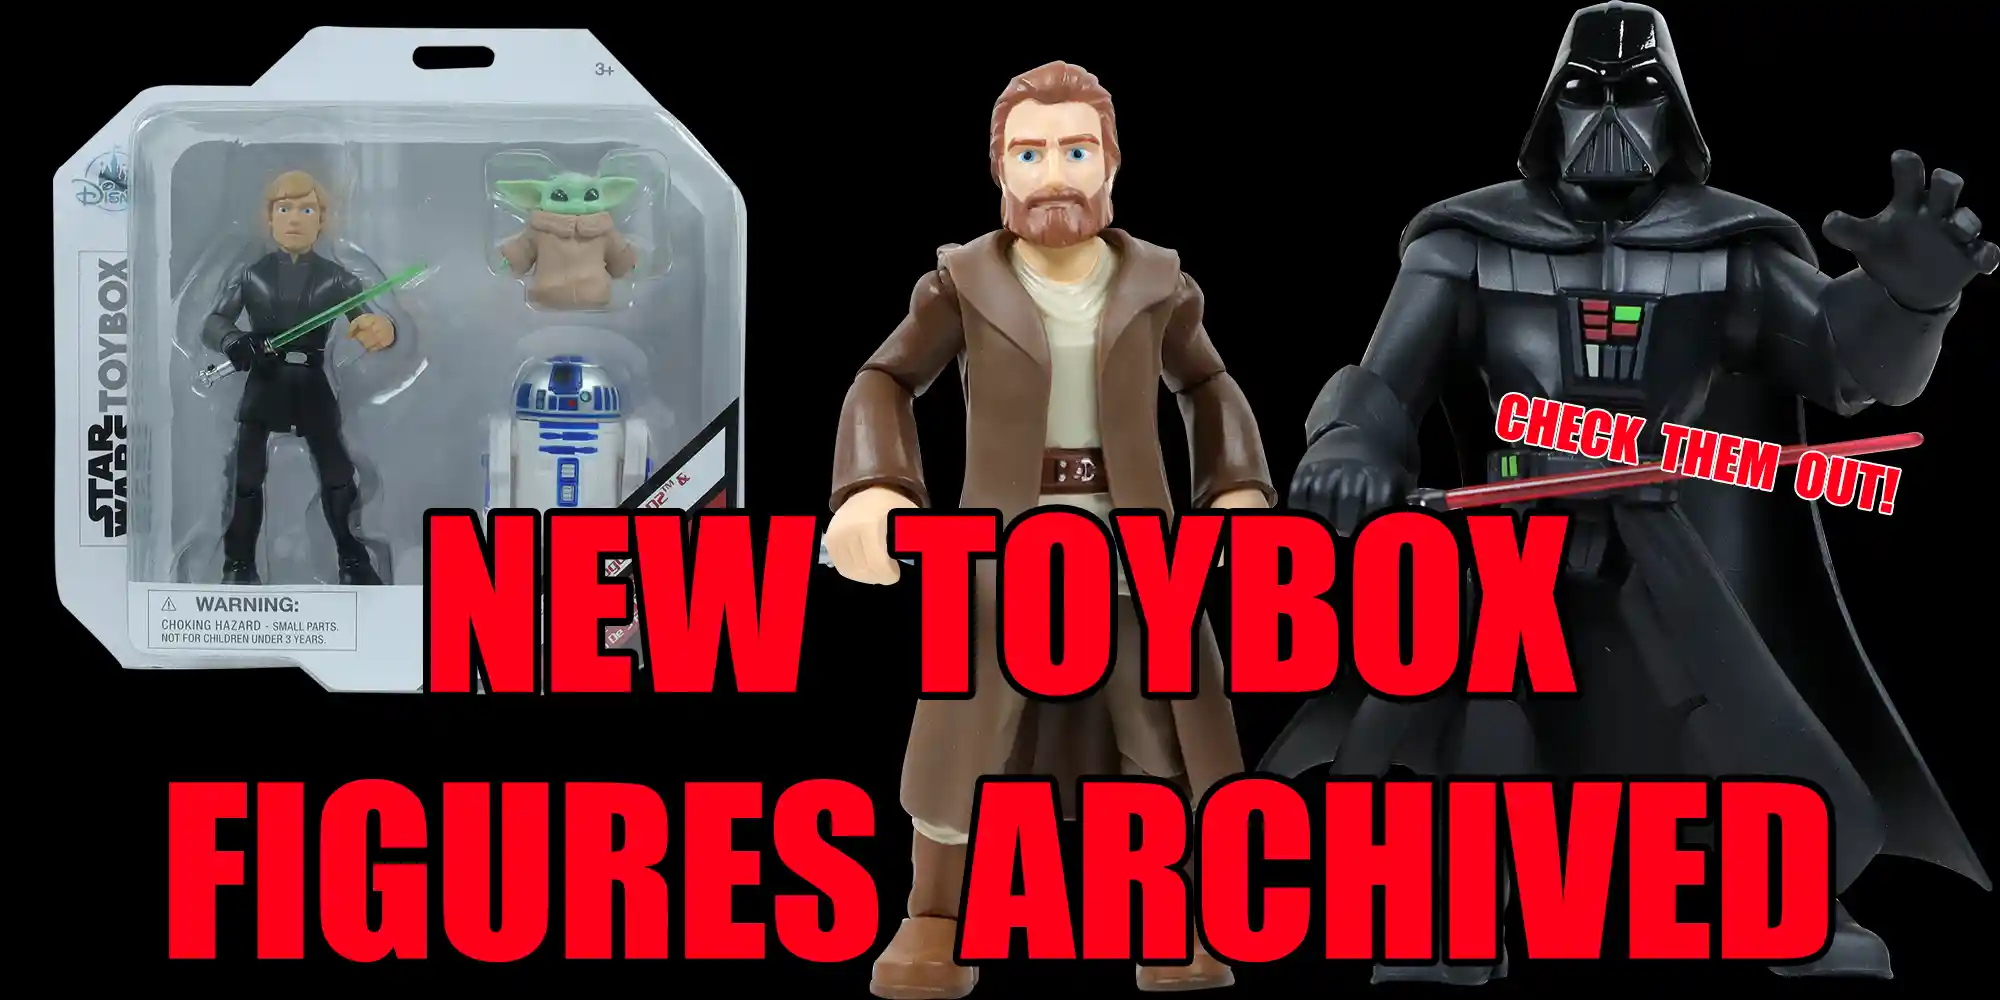 New Disney 5" ToyBox Figures Archived - Check Them Out!